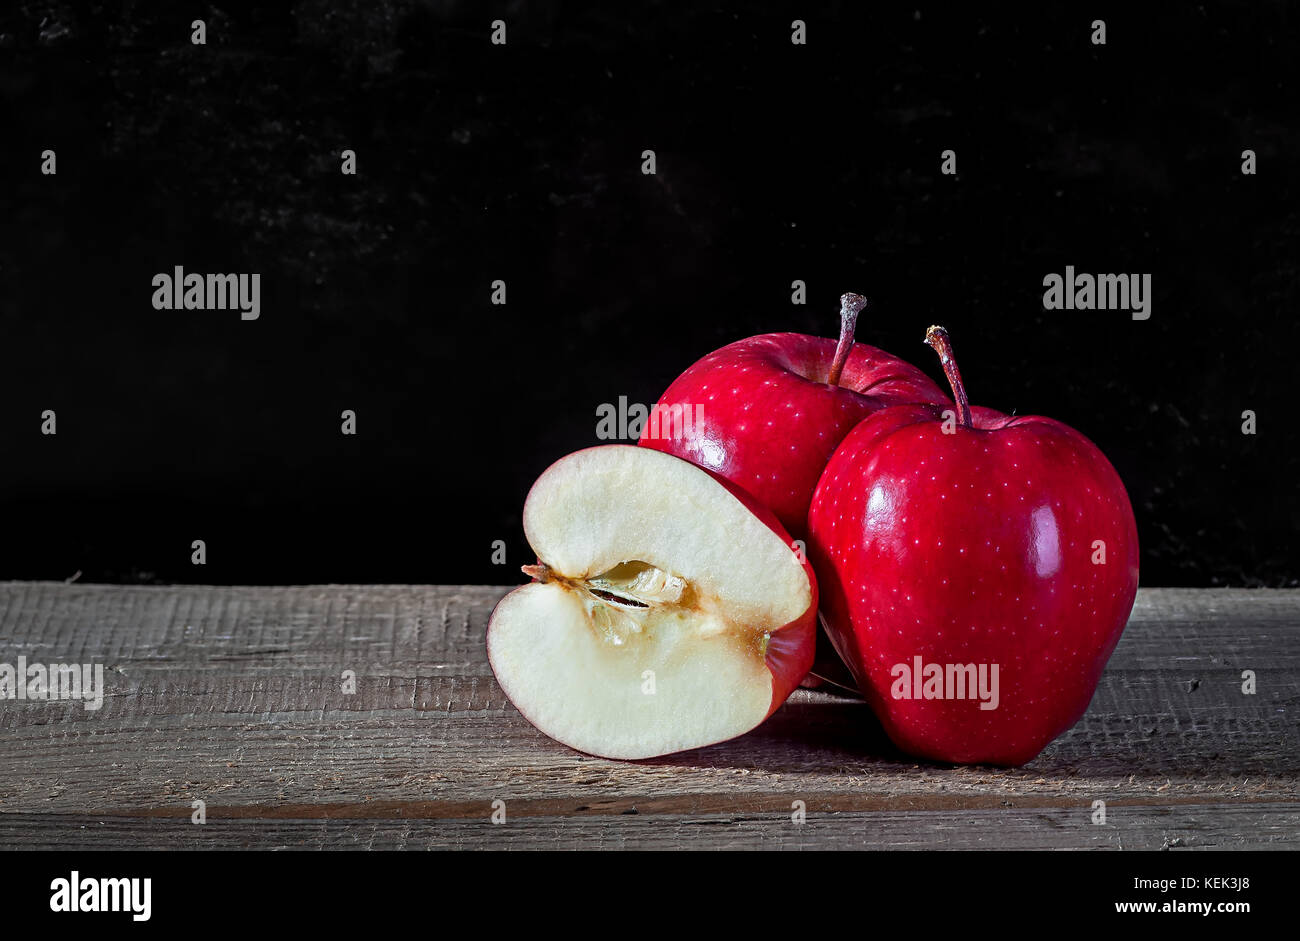 Whole and cut in half apple Stock Photo